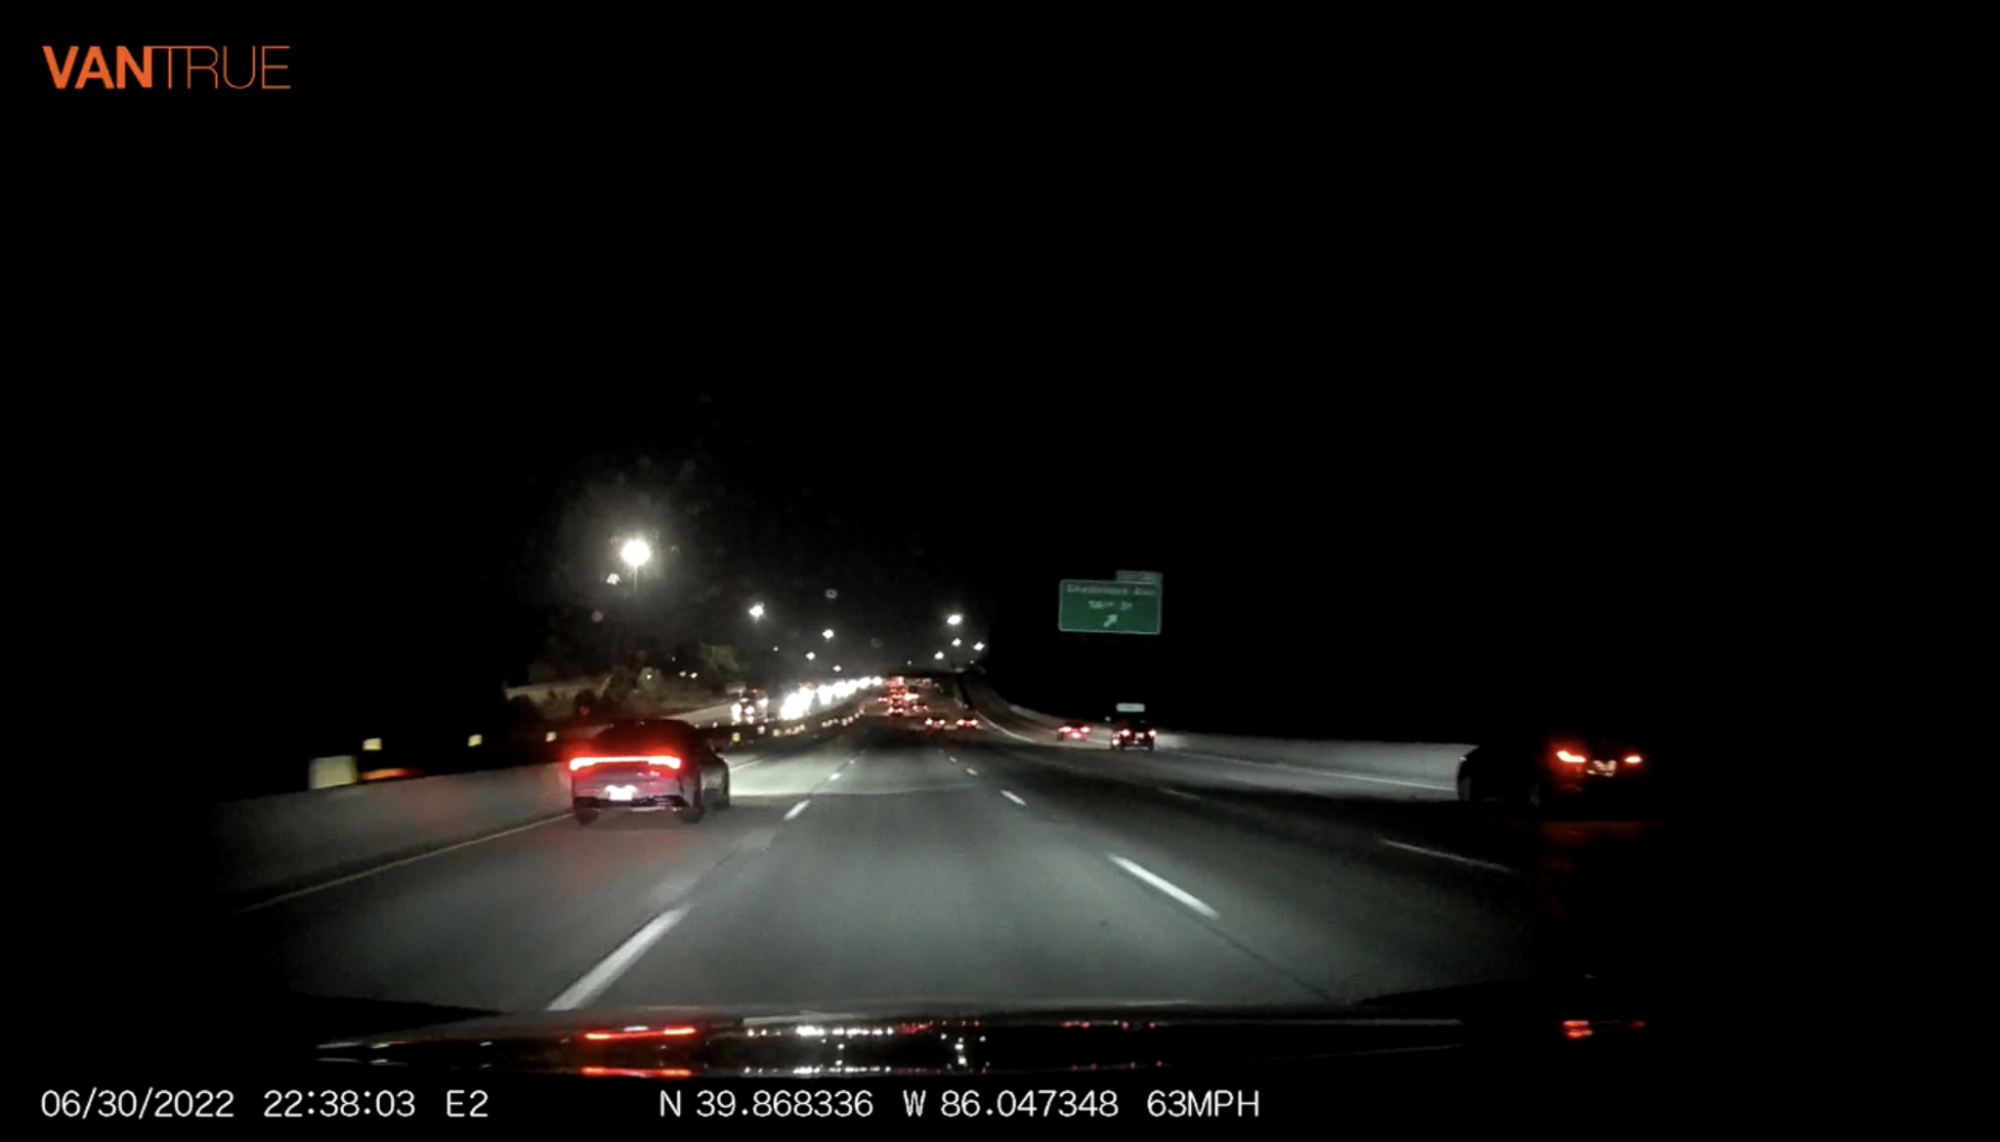 night time shot of cars on a road from the view of a dashcam